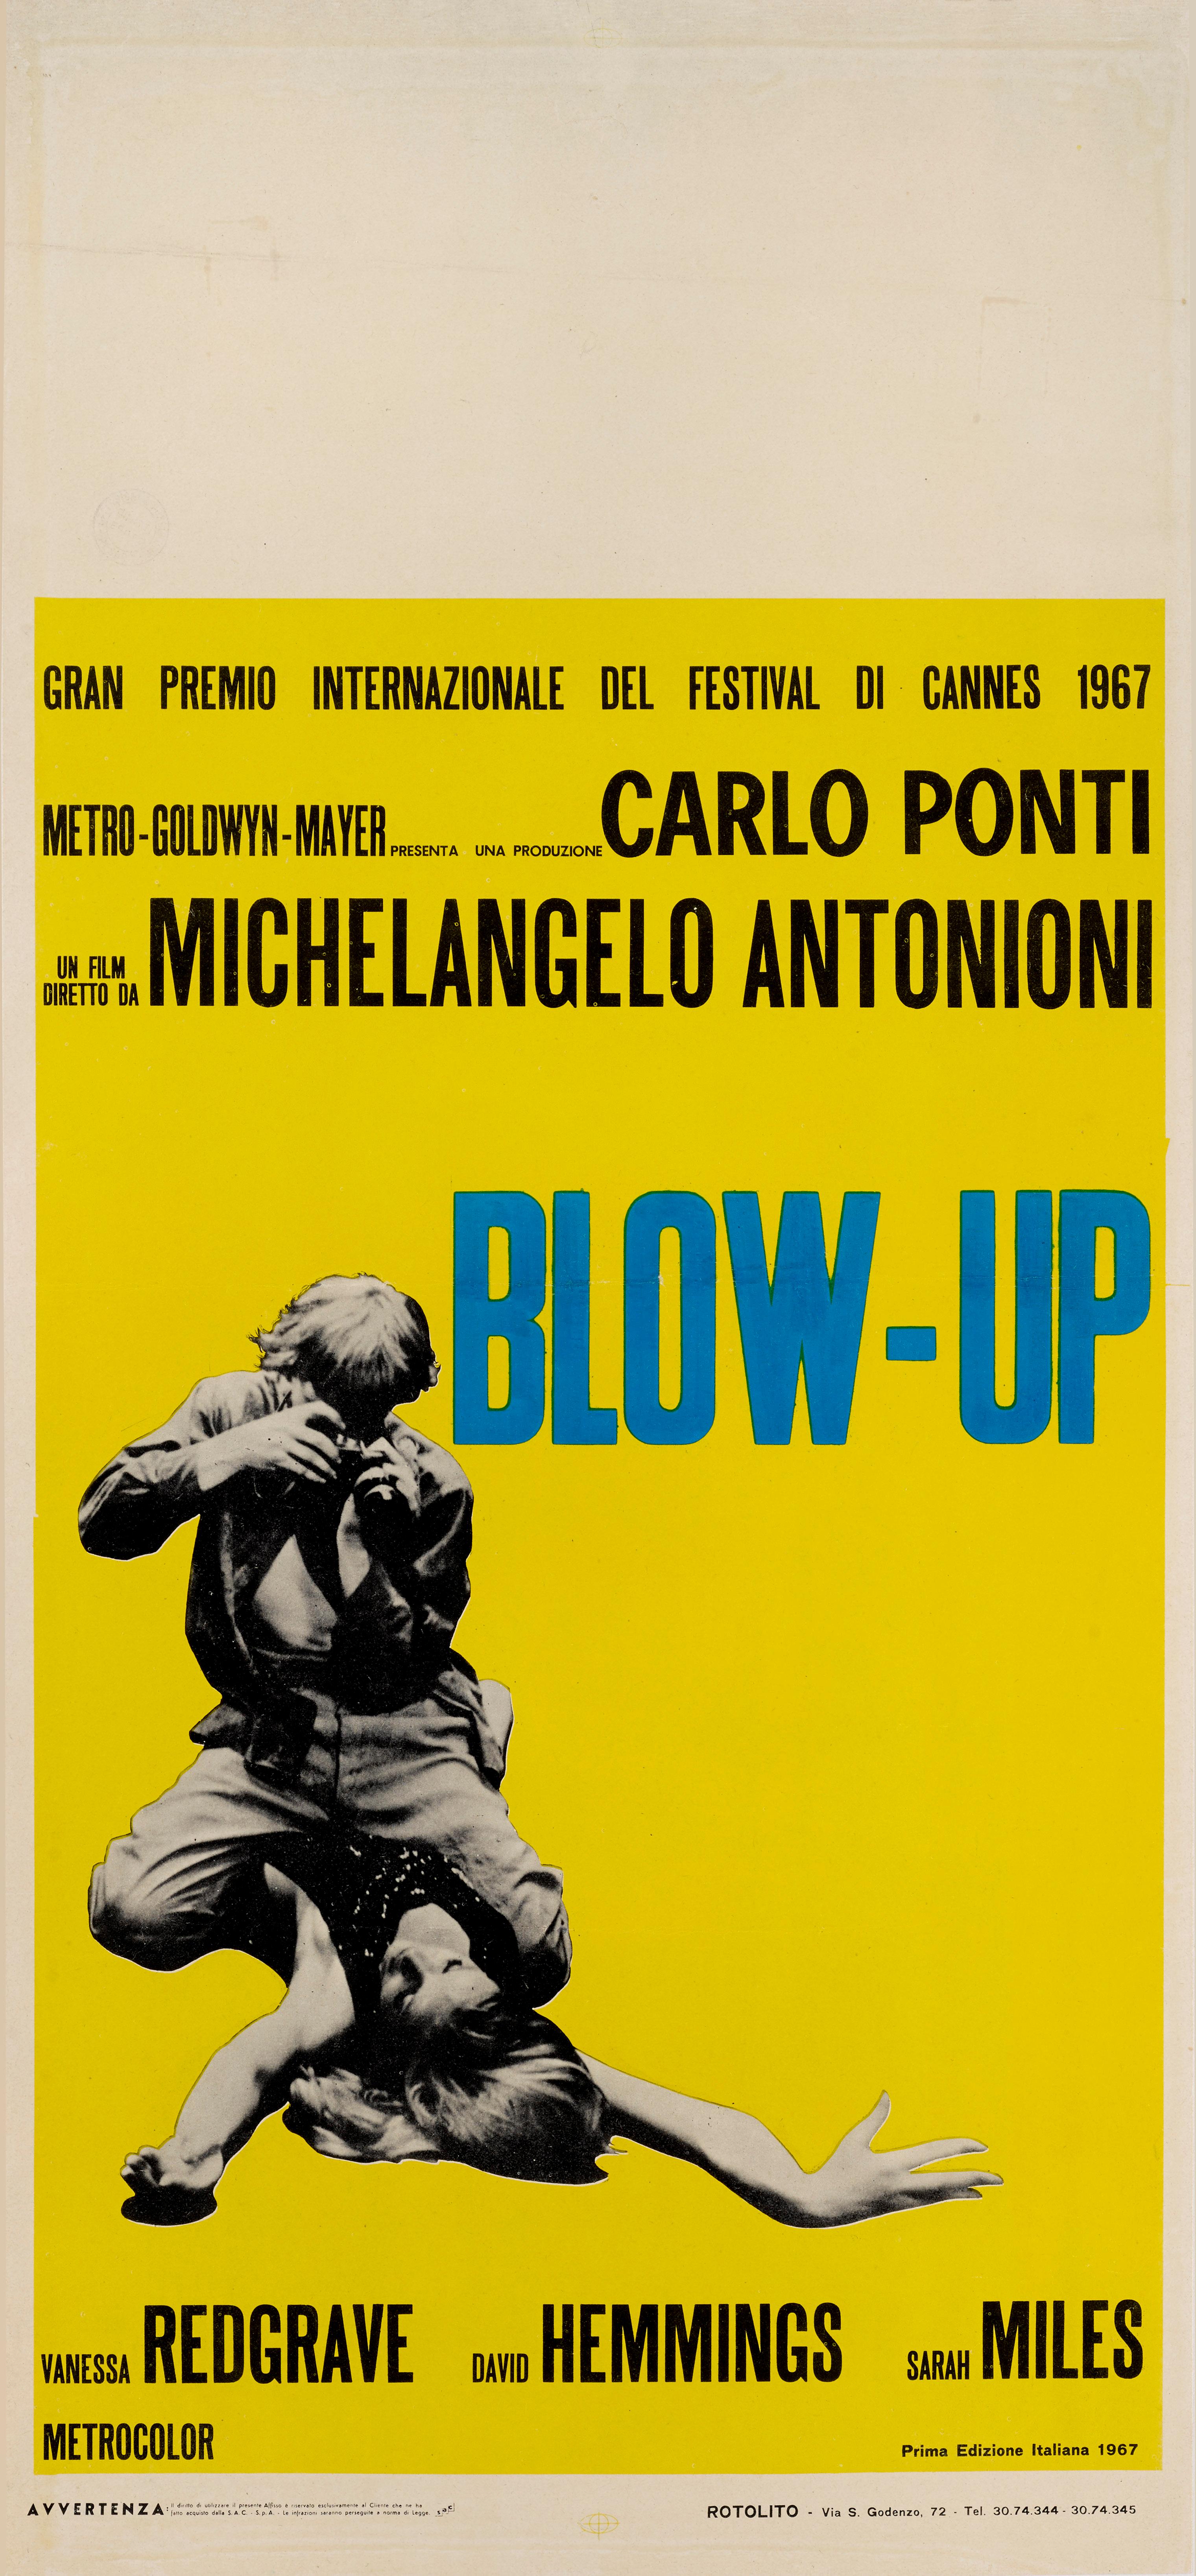 Original Italian posters for Michelangelo Antonioni 1967 film blow up. The film is now considered a cult Classic.
3 different coloured posters were created for this film. One red, one green and this yellow one.
The poster is conservation linen